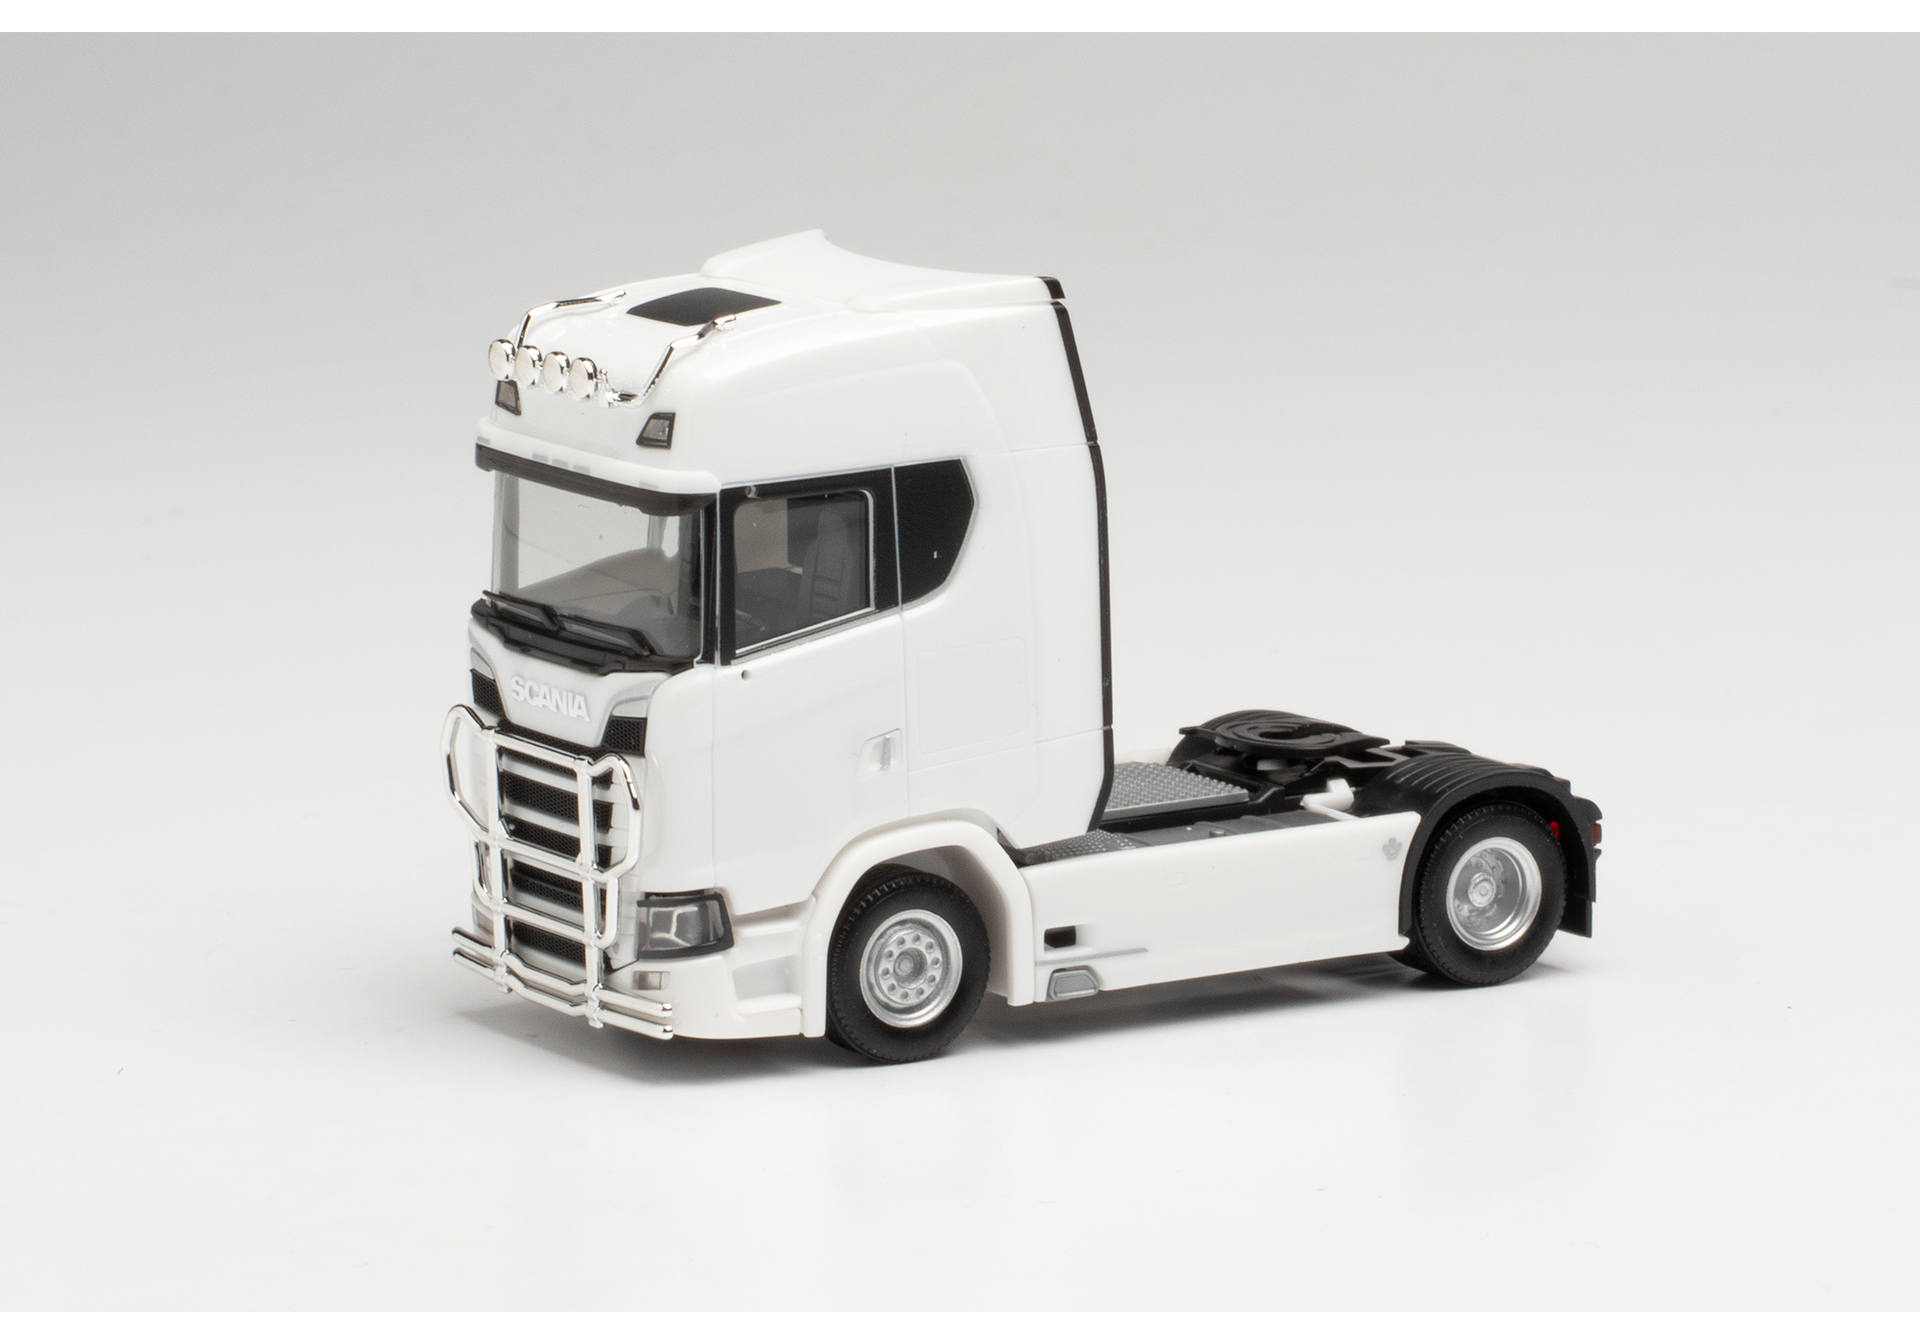 Scania CS 20 high-roof tractor with light bar and bumper, white